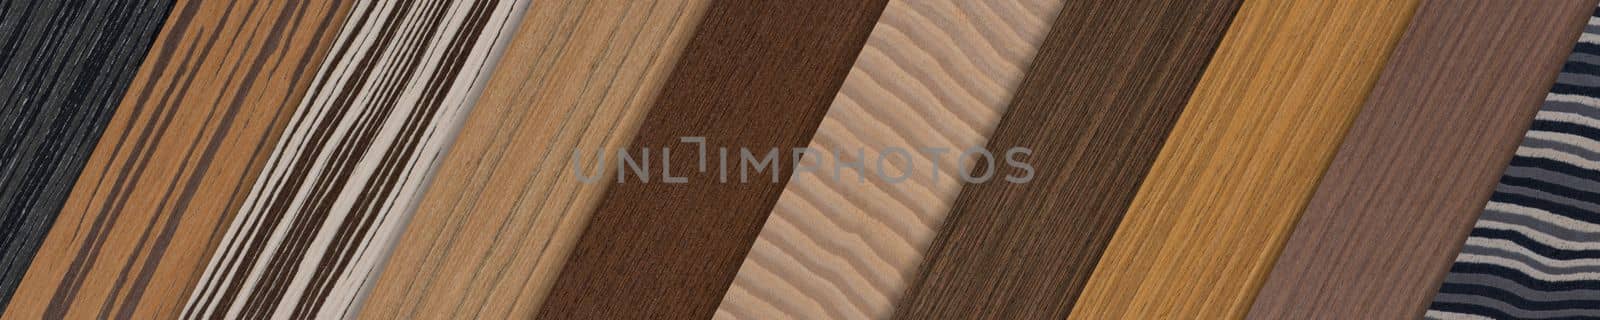 Samples of wood of different species. Pieces of wood veneer in different shades and textures. Samples of wood for the production of floor furniture or doors top view. by SERSOL